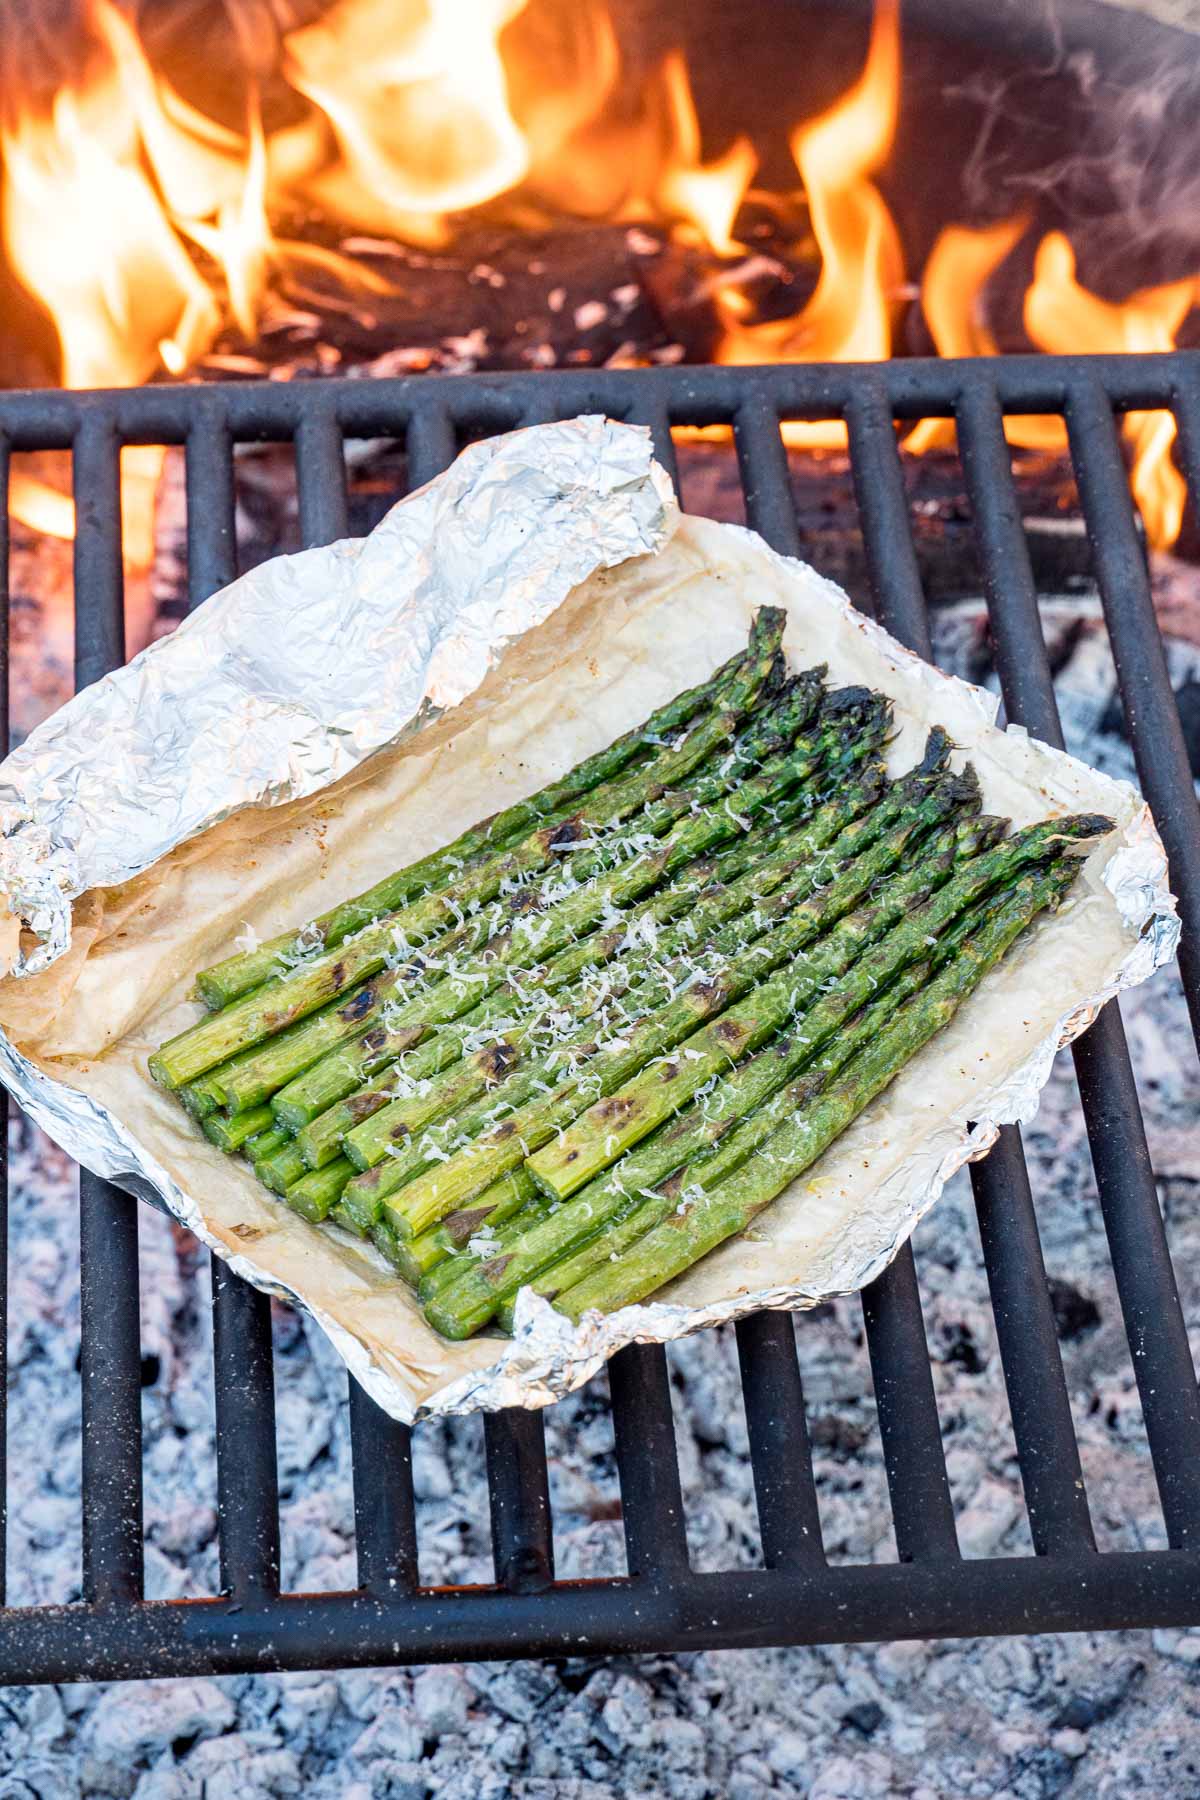 Grilled asparagus in a foil package on a fire